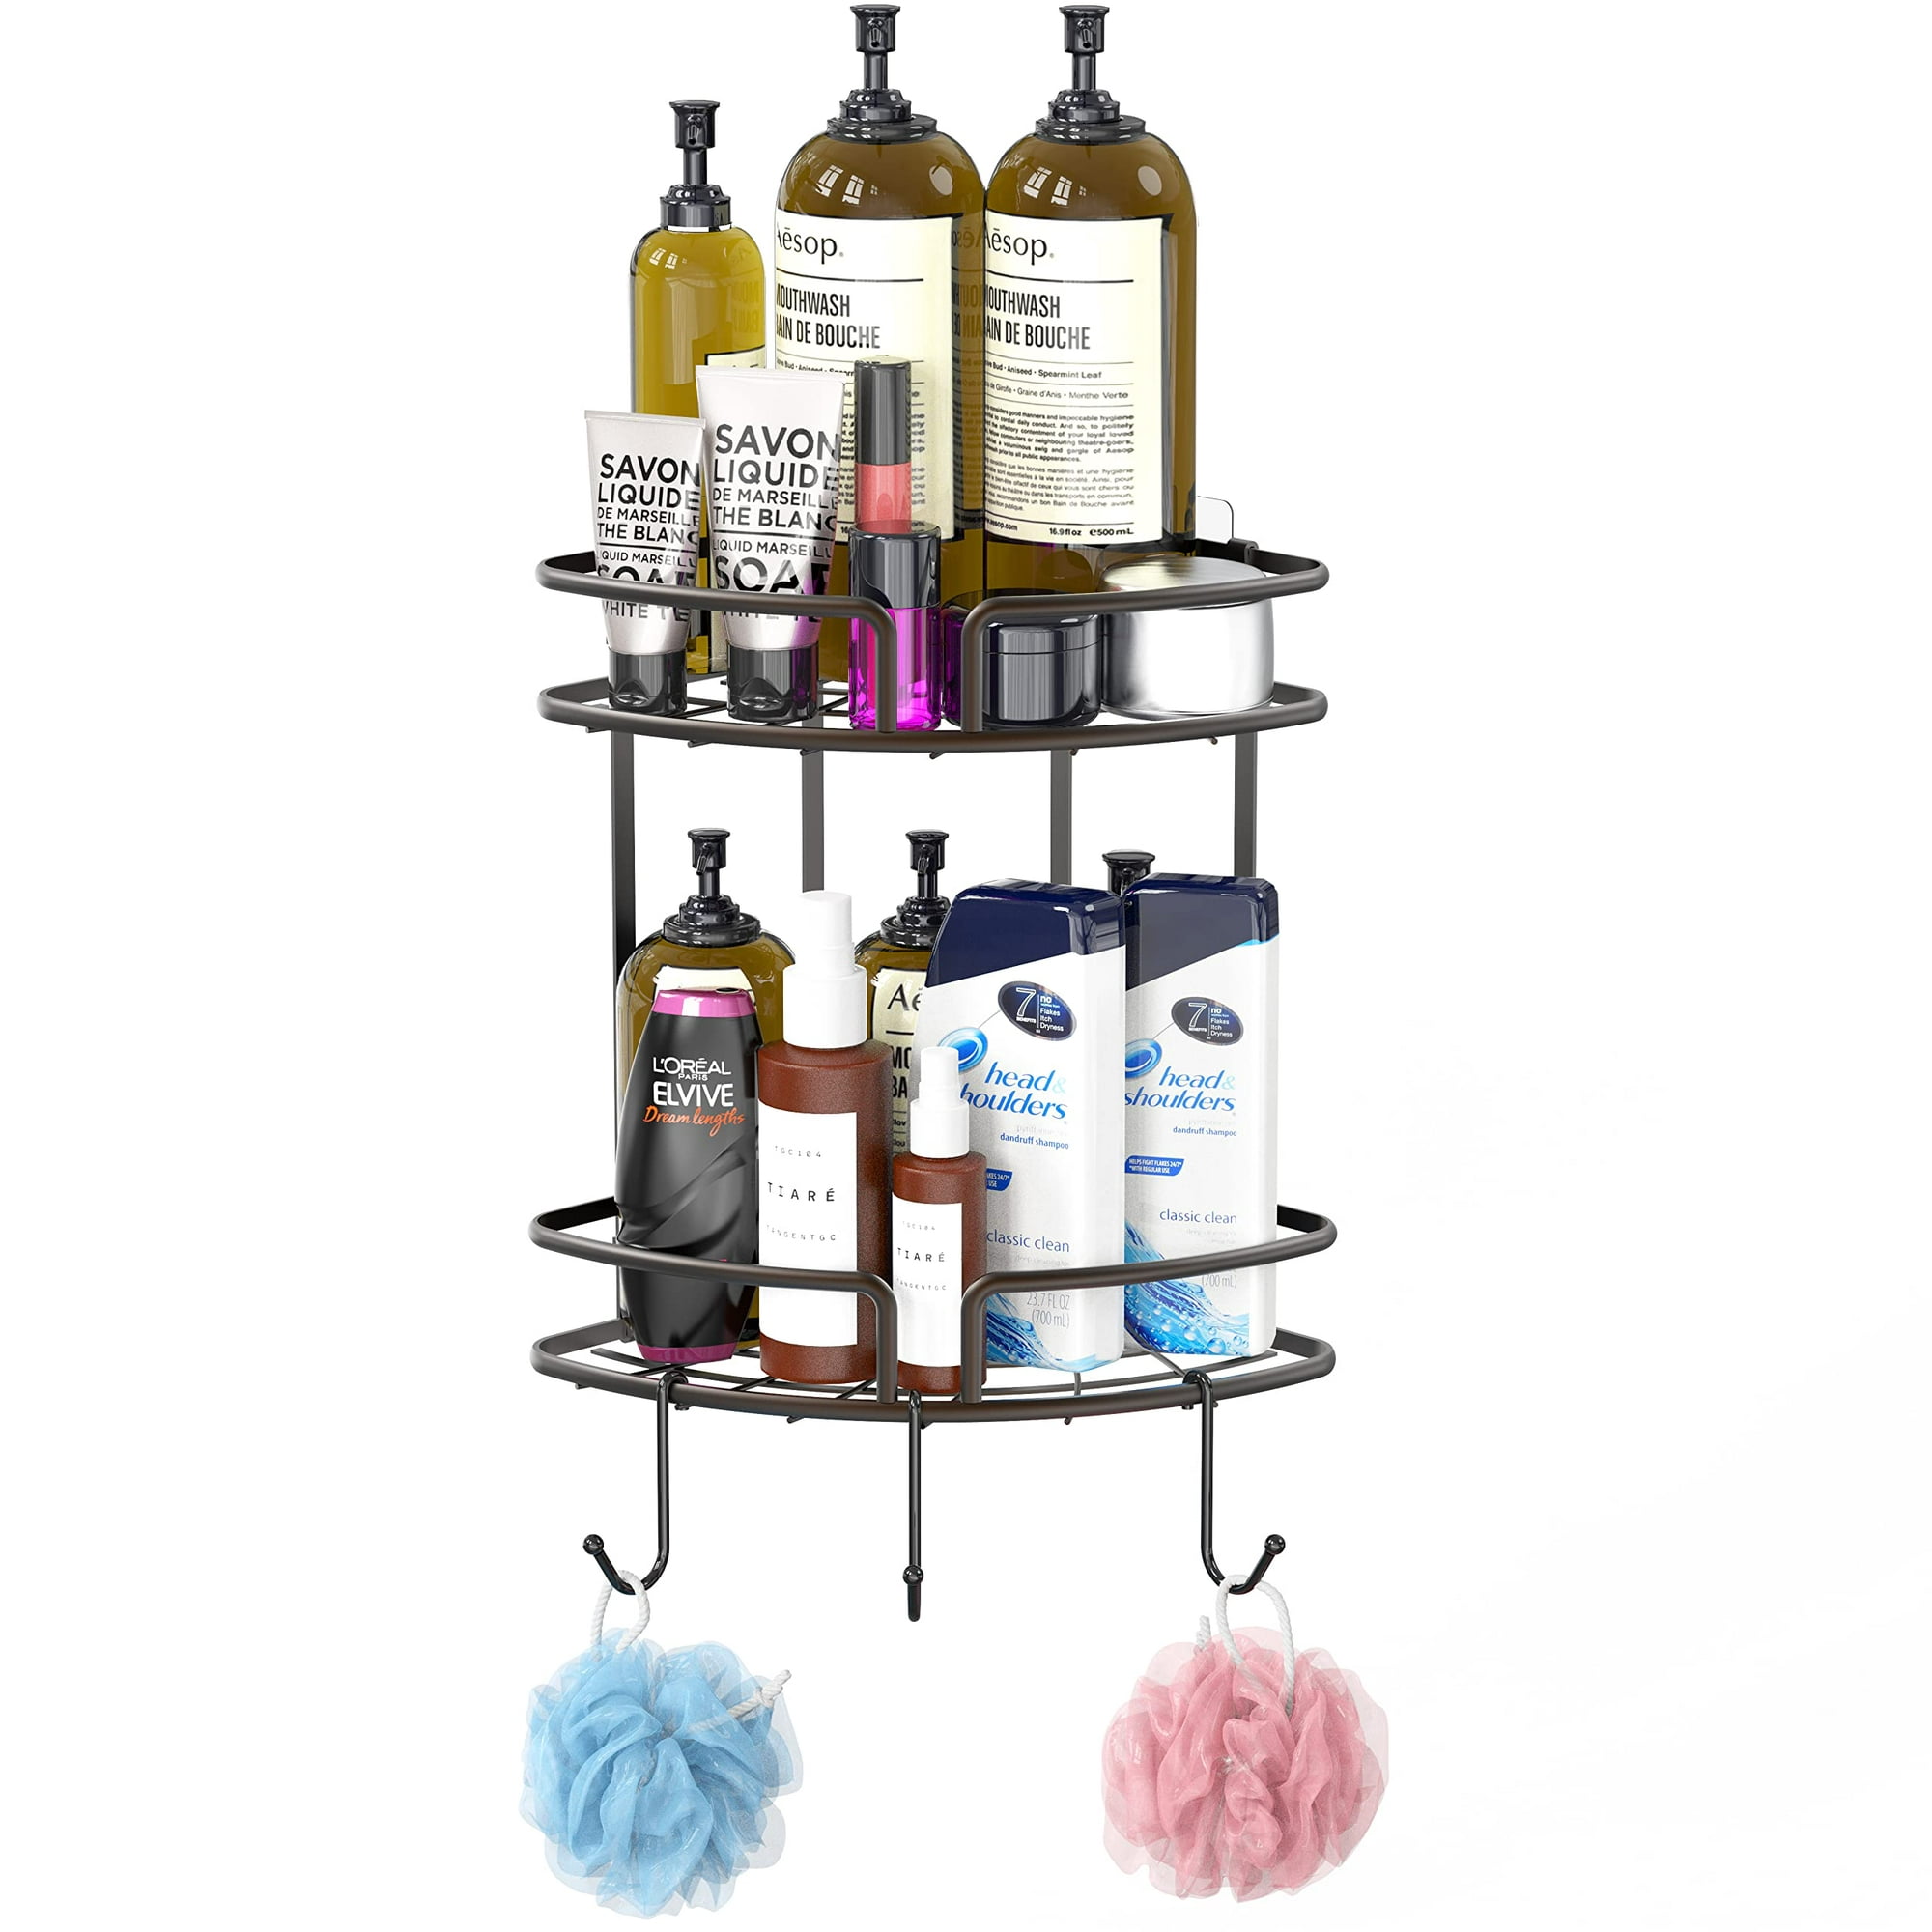 RUSTPROOF & EASY-CLEAN SHOWER CADDY- Over 2000 '5-Star Reviews